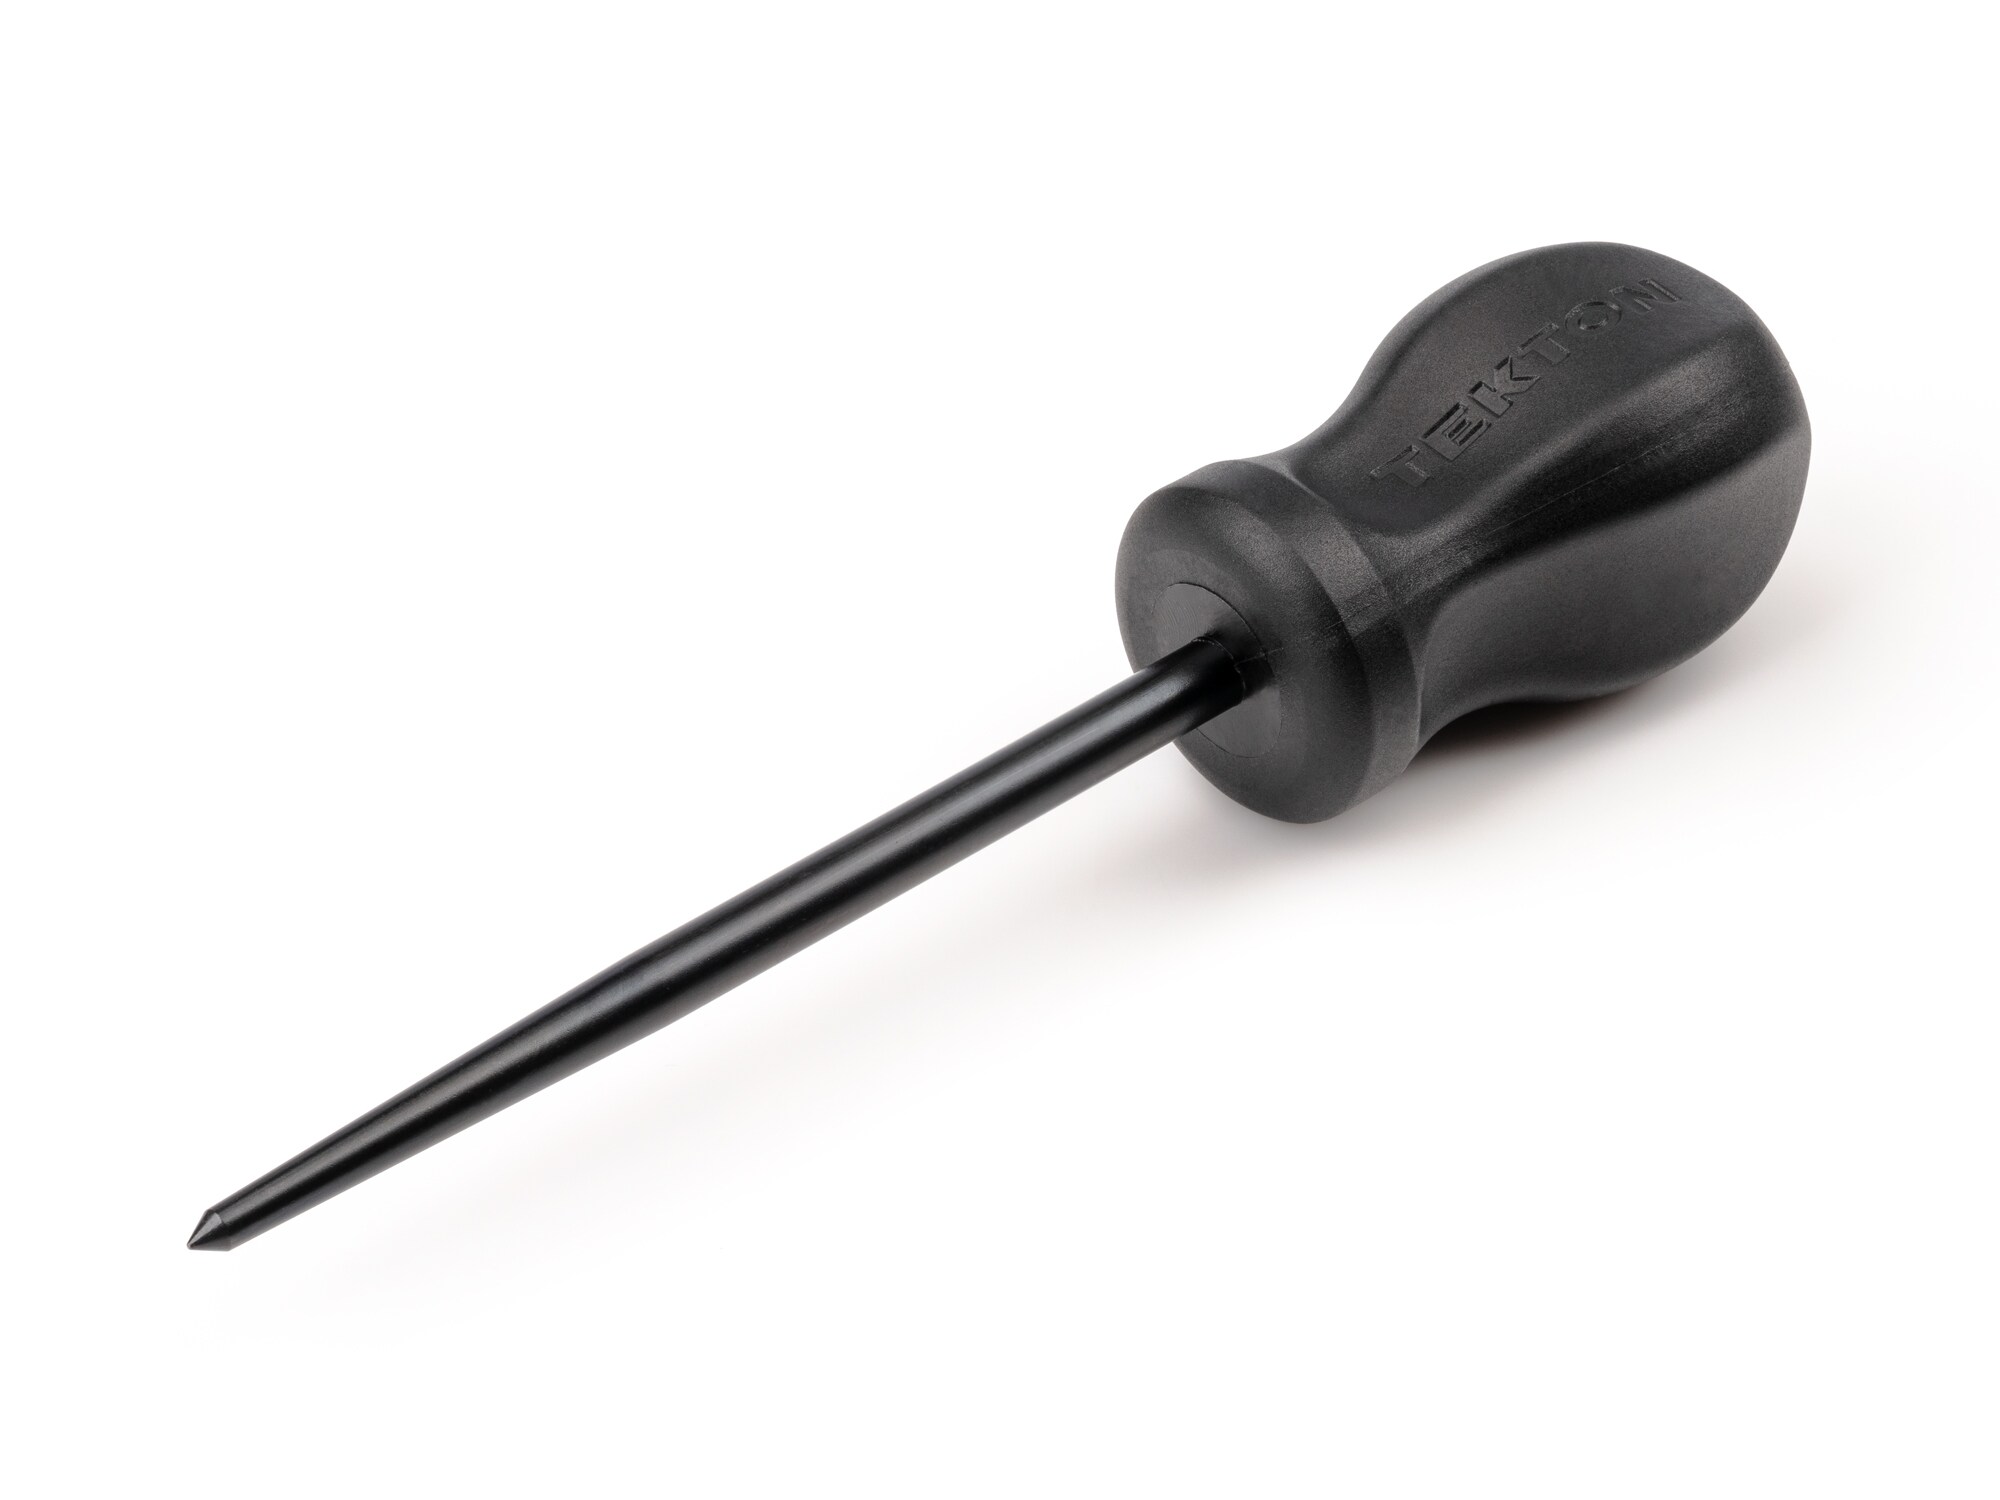 Tekton Scratch and Punch Awl with Hard Handle | PNH21106